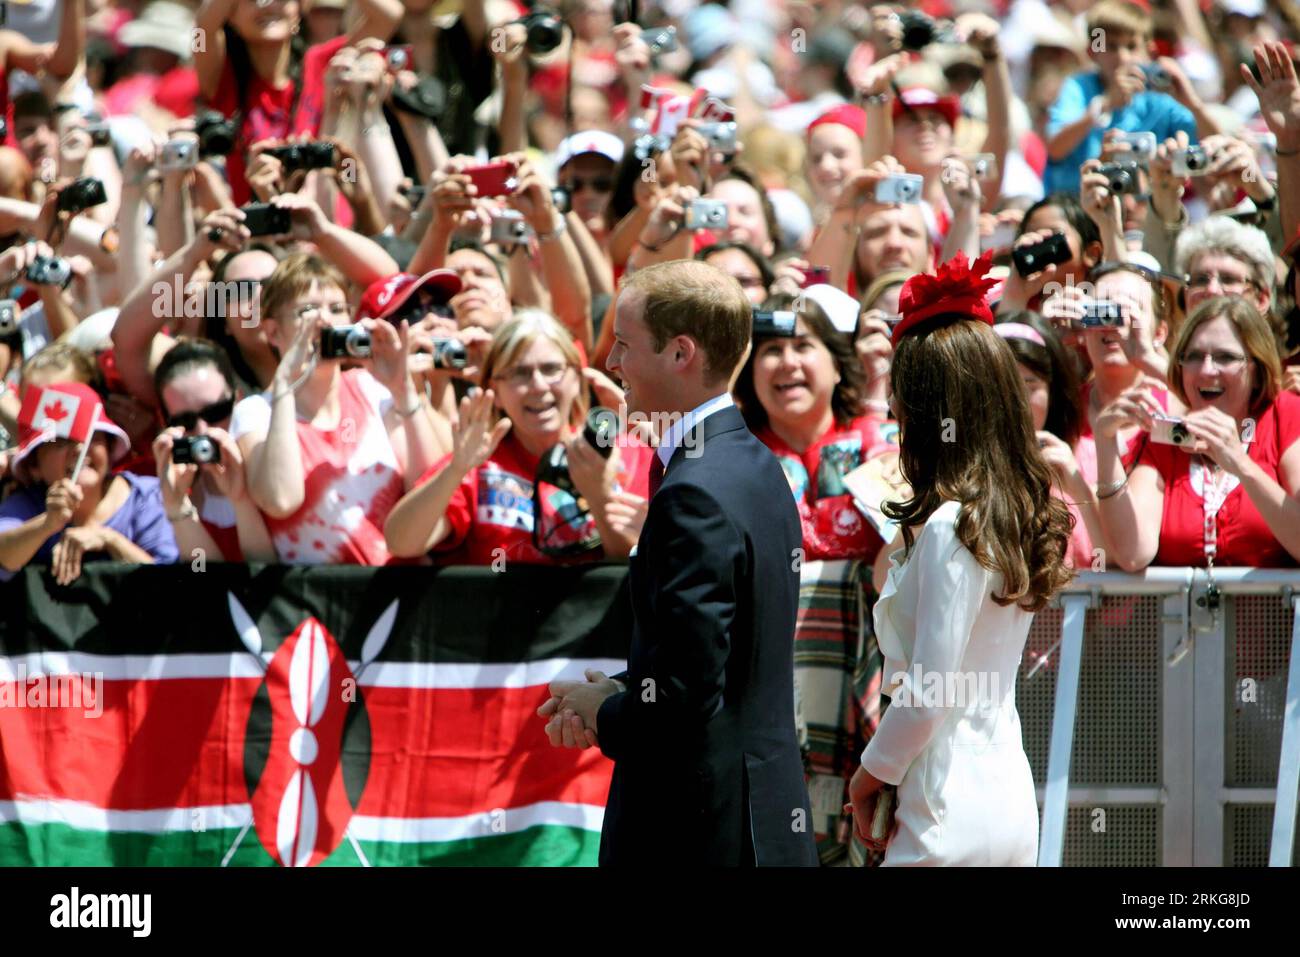 Bildnummer: 55565298  Datum: 01.07.2011  Copyright: imago/Xinhua (110702)-- OTTAWA, July 2, 2011 (Xinhua) -- Britain s Prince William and his wife Kate greet Canadians during the 144th Canada Day celebrations on Parliament Hill in Ottawa, Canada, on July 1, 2011. The Royal couple is on a nine-day official visit to Canada, their first overseas trip since being married.(Xinhua/Zhang Dacheng)(zl) CANADA-CANADA DAY-CELEBRATION PUBLICATIONxNOTxINxCHN People Entertainment Adel GBR Königshaus Familie Frau Ehefrau Kate Ehemann Mann xda x0x premiumd Middleton 2011 quer   Catherine Duchess Cambridge Stock Photo